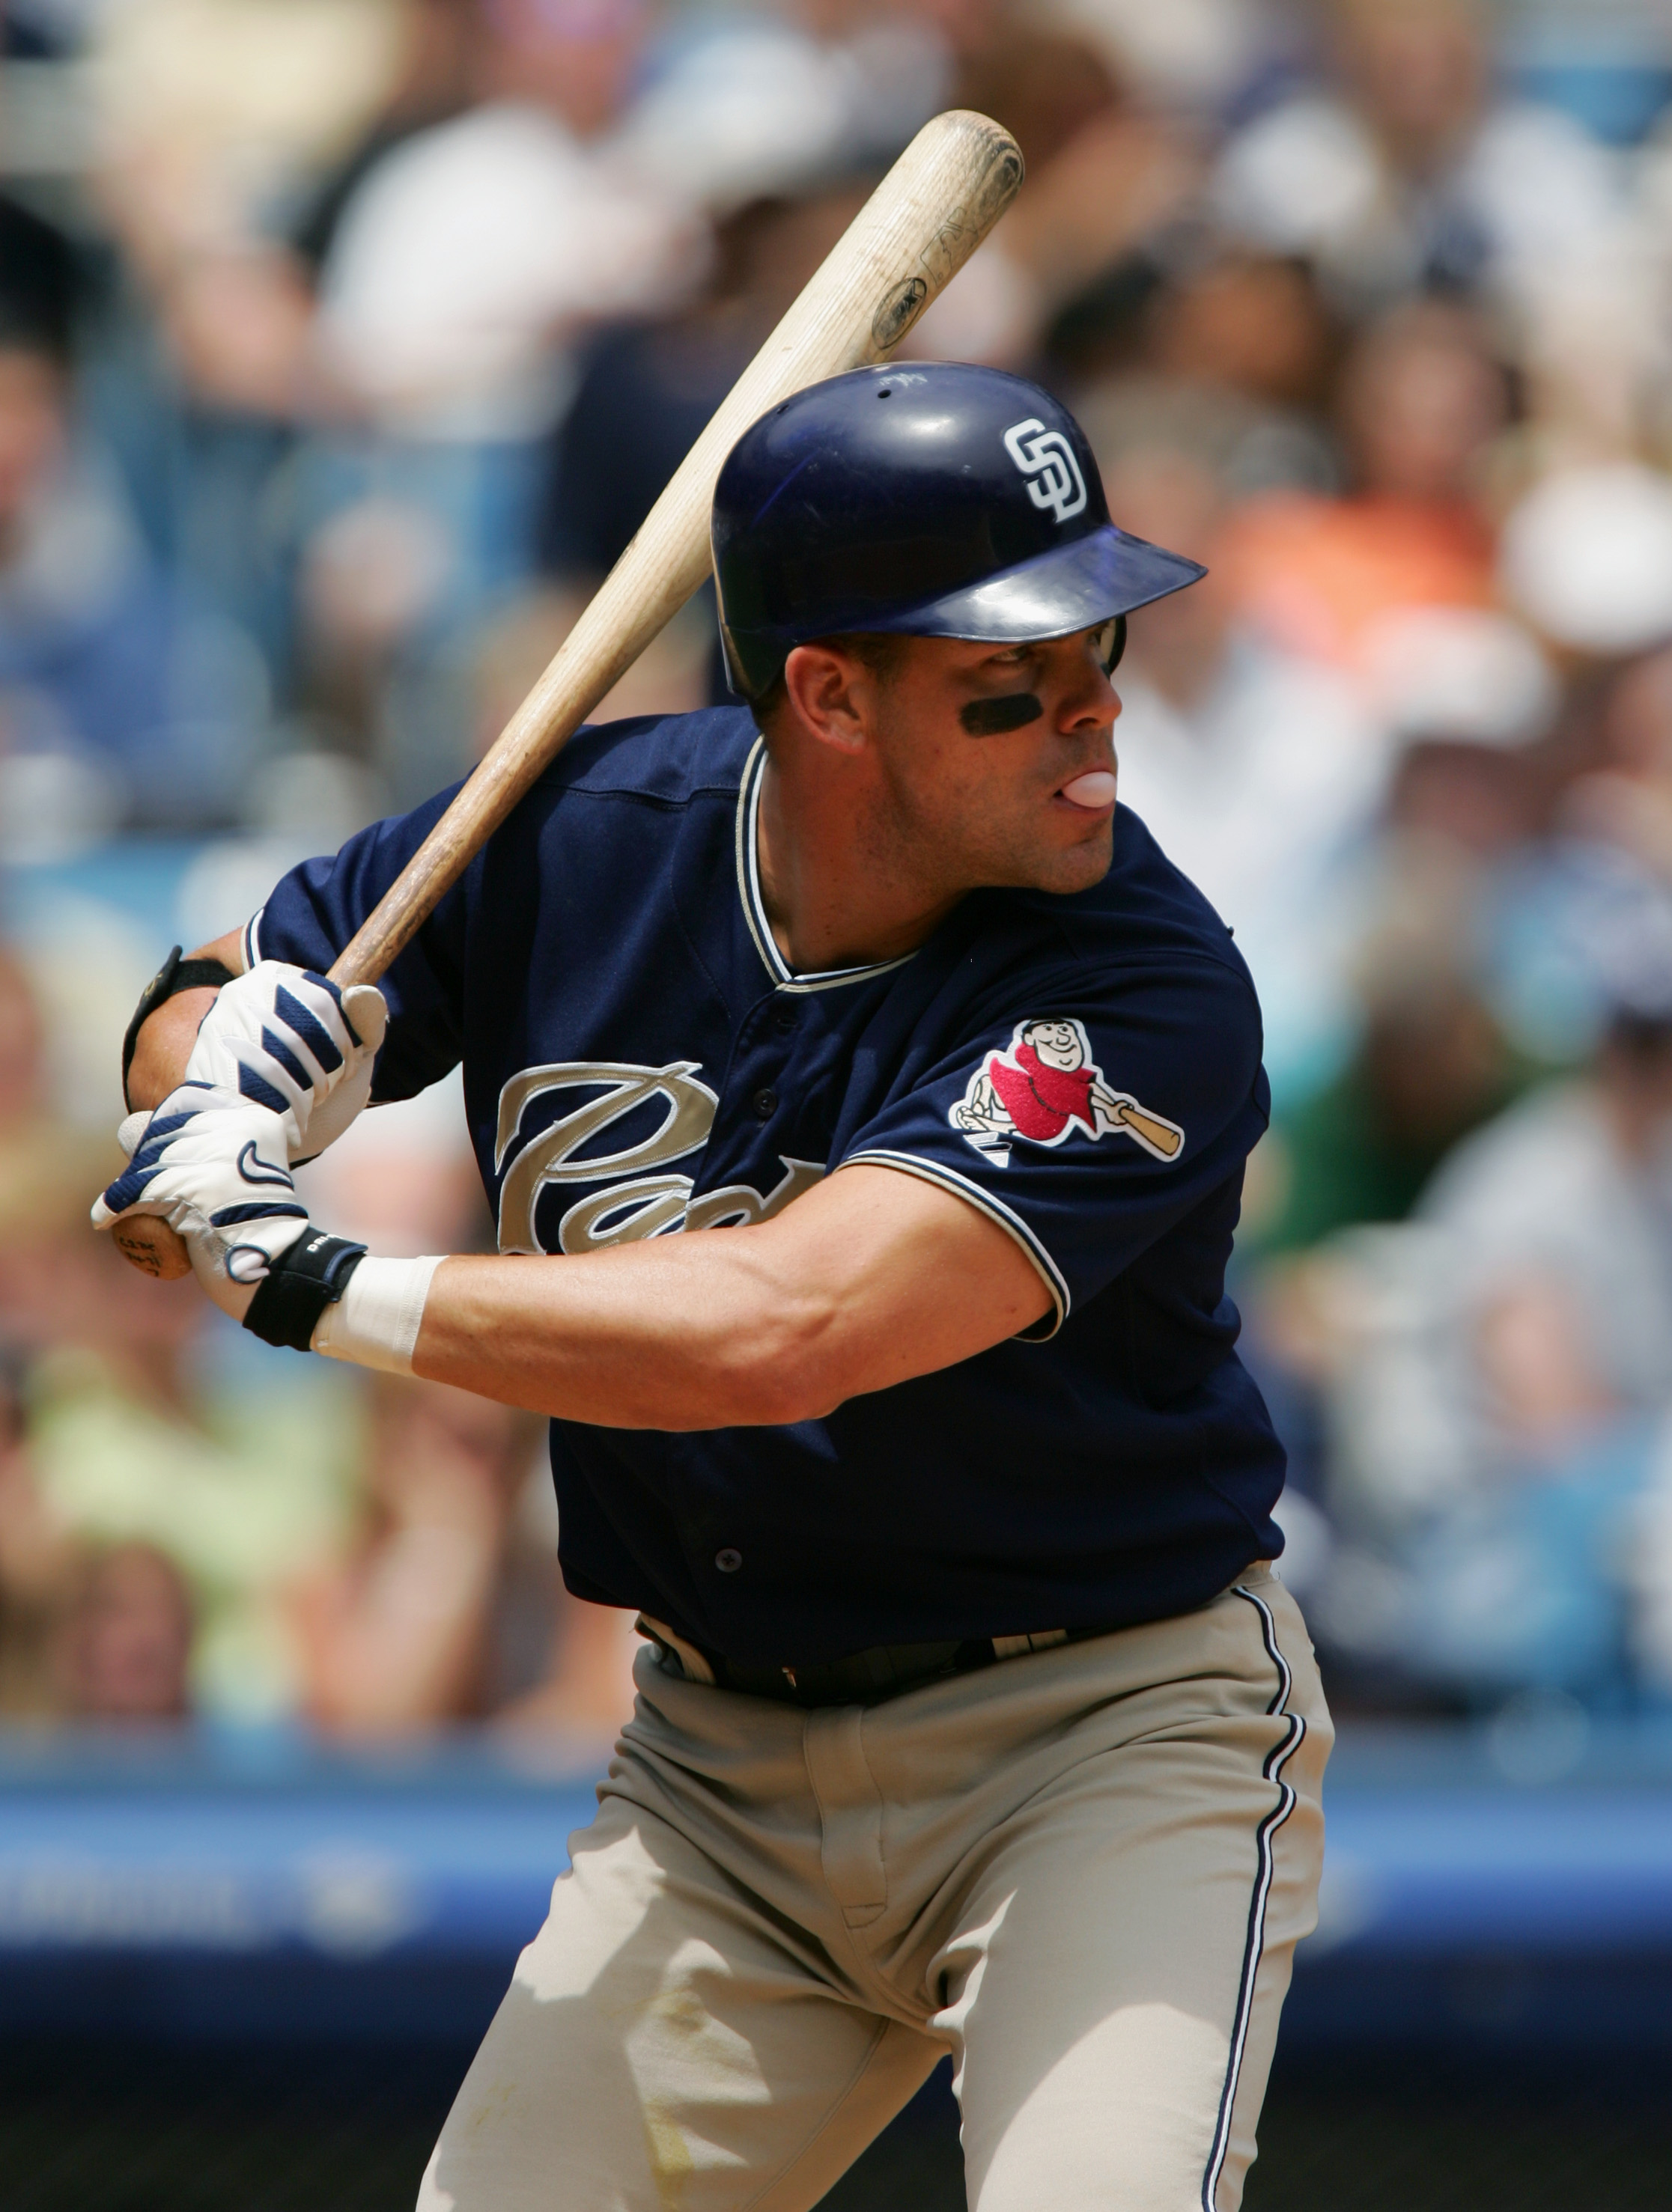 NEW YORK - JUNE 13:  Jeff Cirillo #7  of the San Diego Padres stands ready at bat during the interleague game against the New York Yankees on June 13, 2004 at Yankee Stadium in the Bronx, New York. The Yankees won 6-5 in the12th inning.  (Photo by Ezra Sh